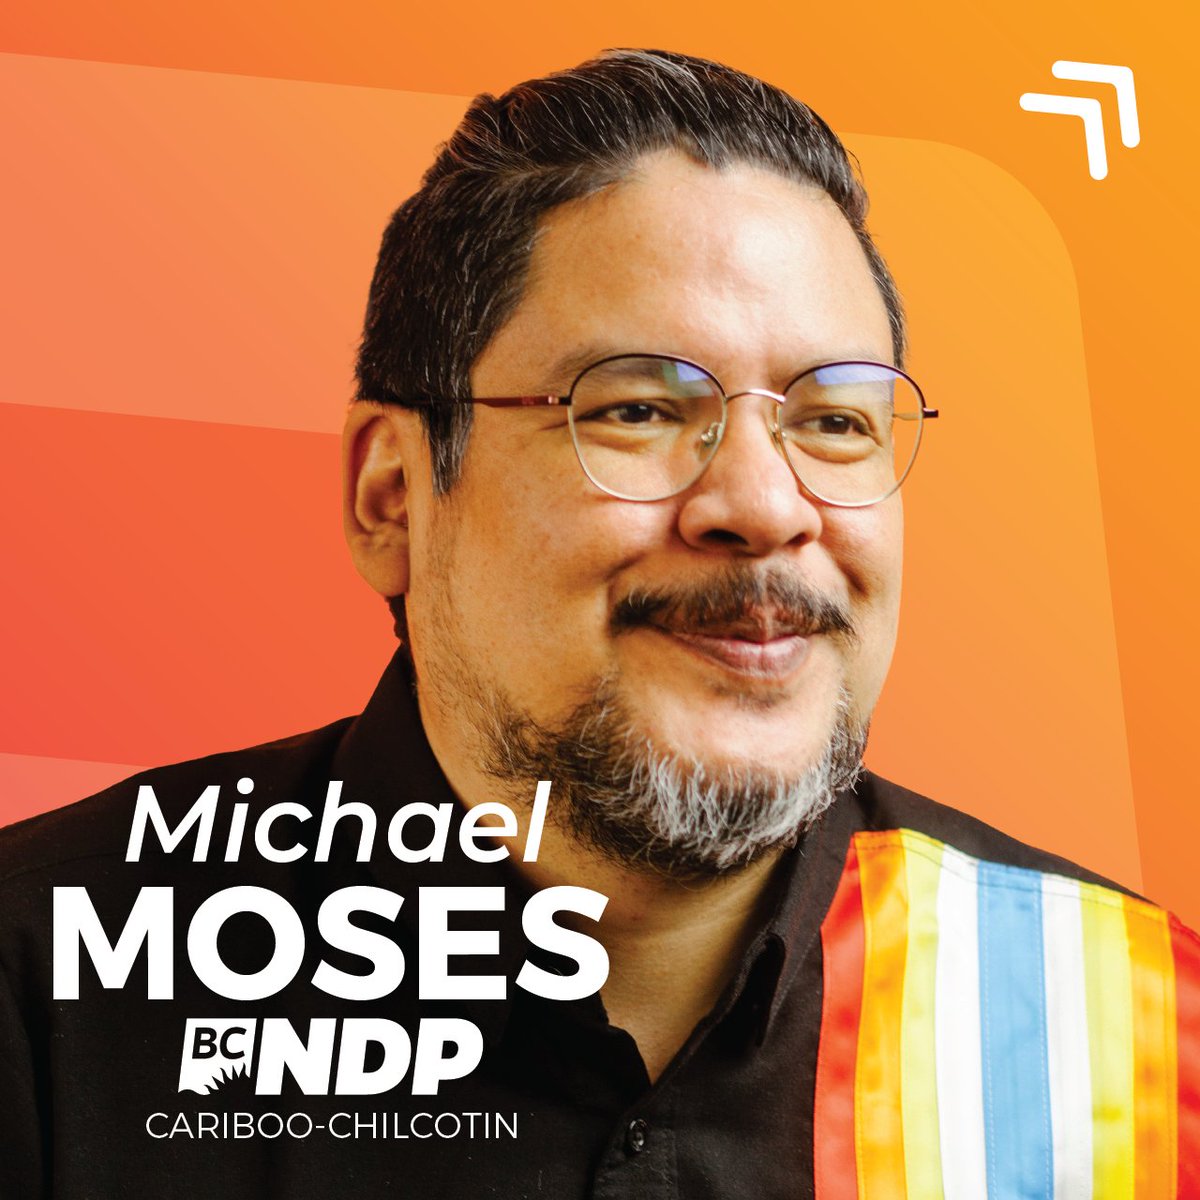 Join us in welcoming Michael Moses, our BC NDP candidate in Cariboo-Chilcotin. Michael is a Williams Lake city councillor, a member of the Lower Nicola Indian Band, and is dedicated to making his community a better place for people to live and thrive. Welcome, @MichaelMosesWL!